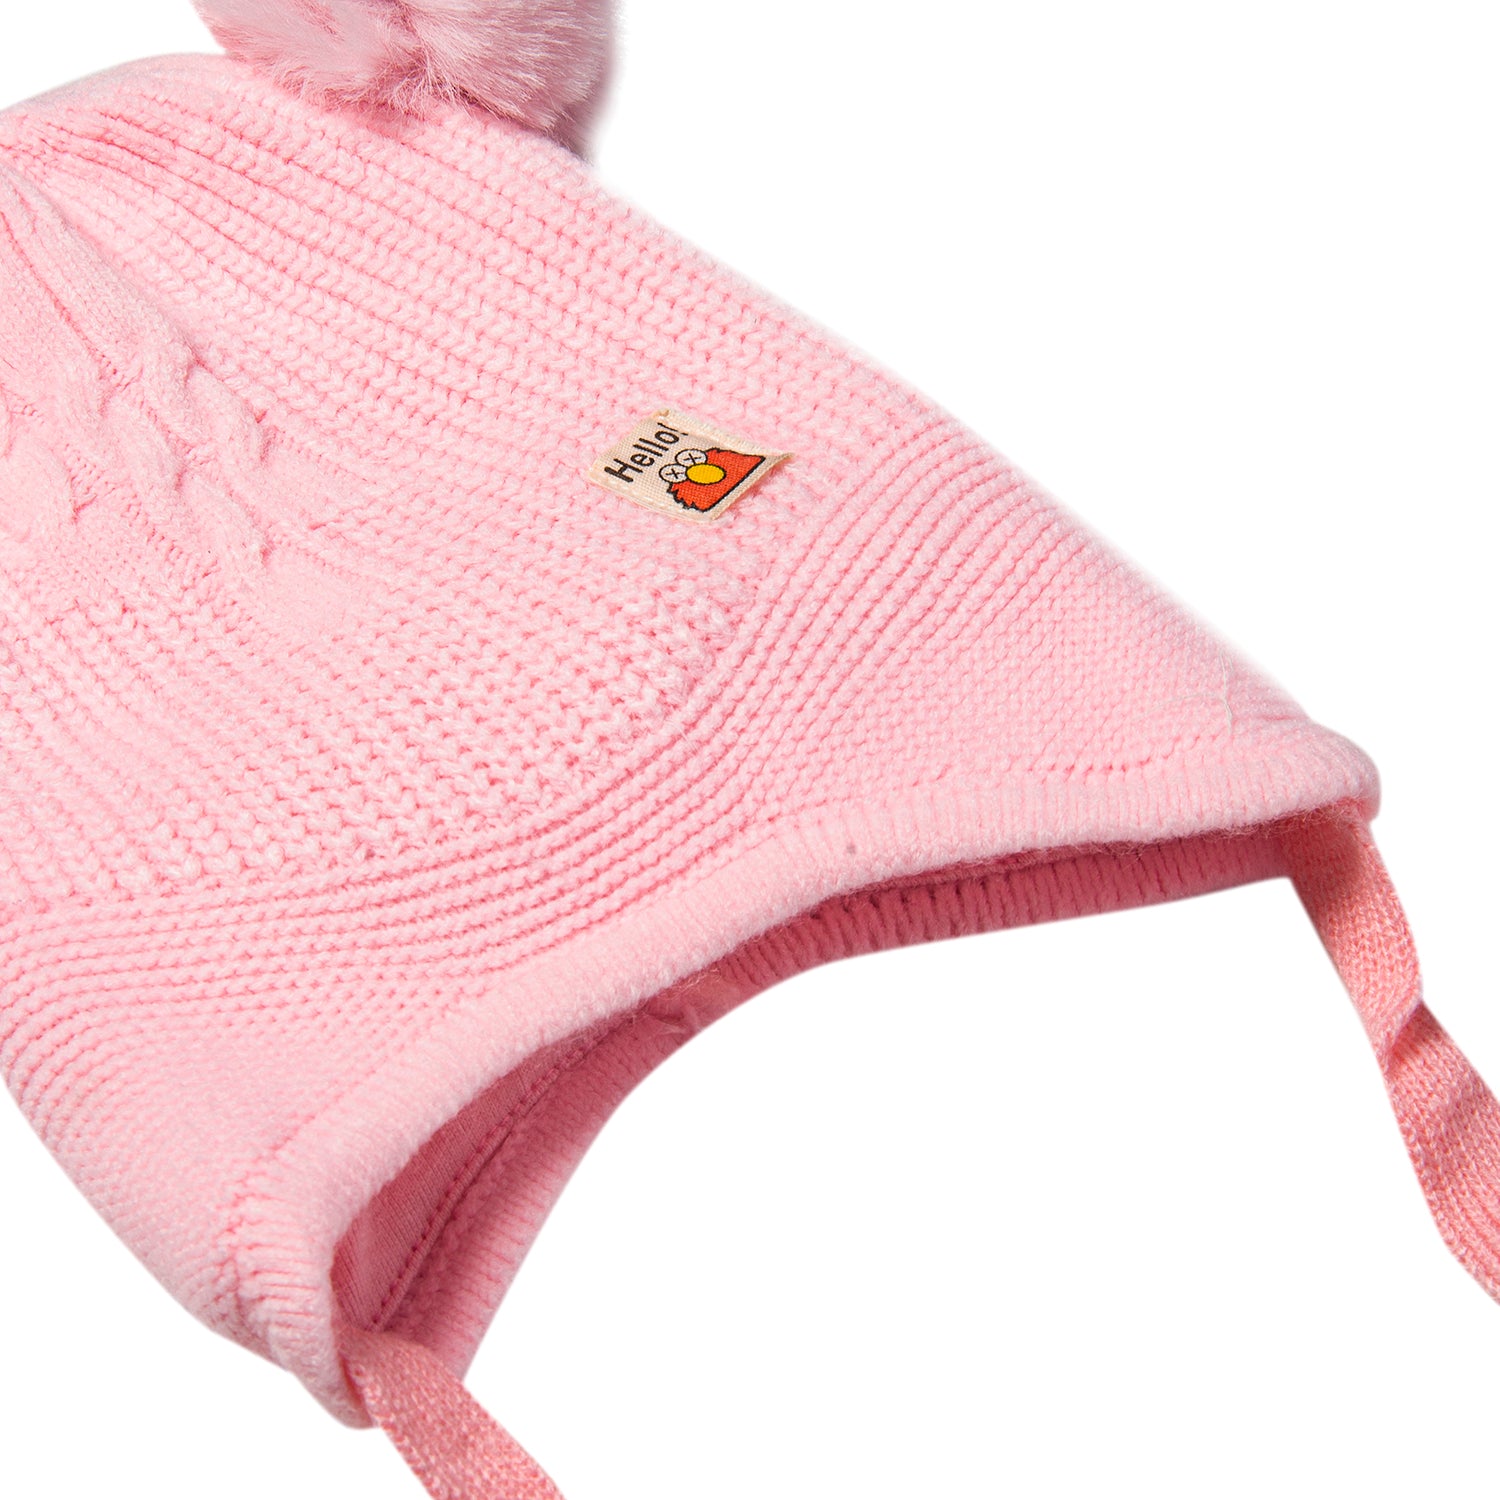 Knit Woollen Cap With Tie Knot For Ear Protection Solid Light Pink - Baby Moo